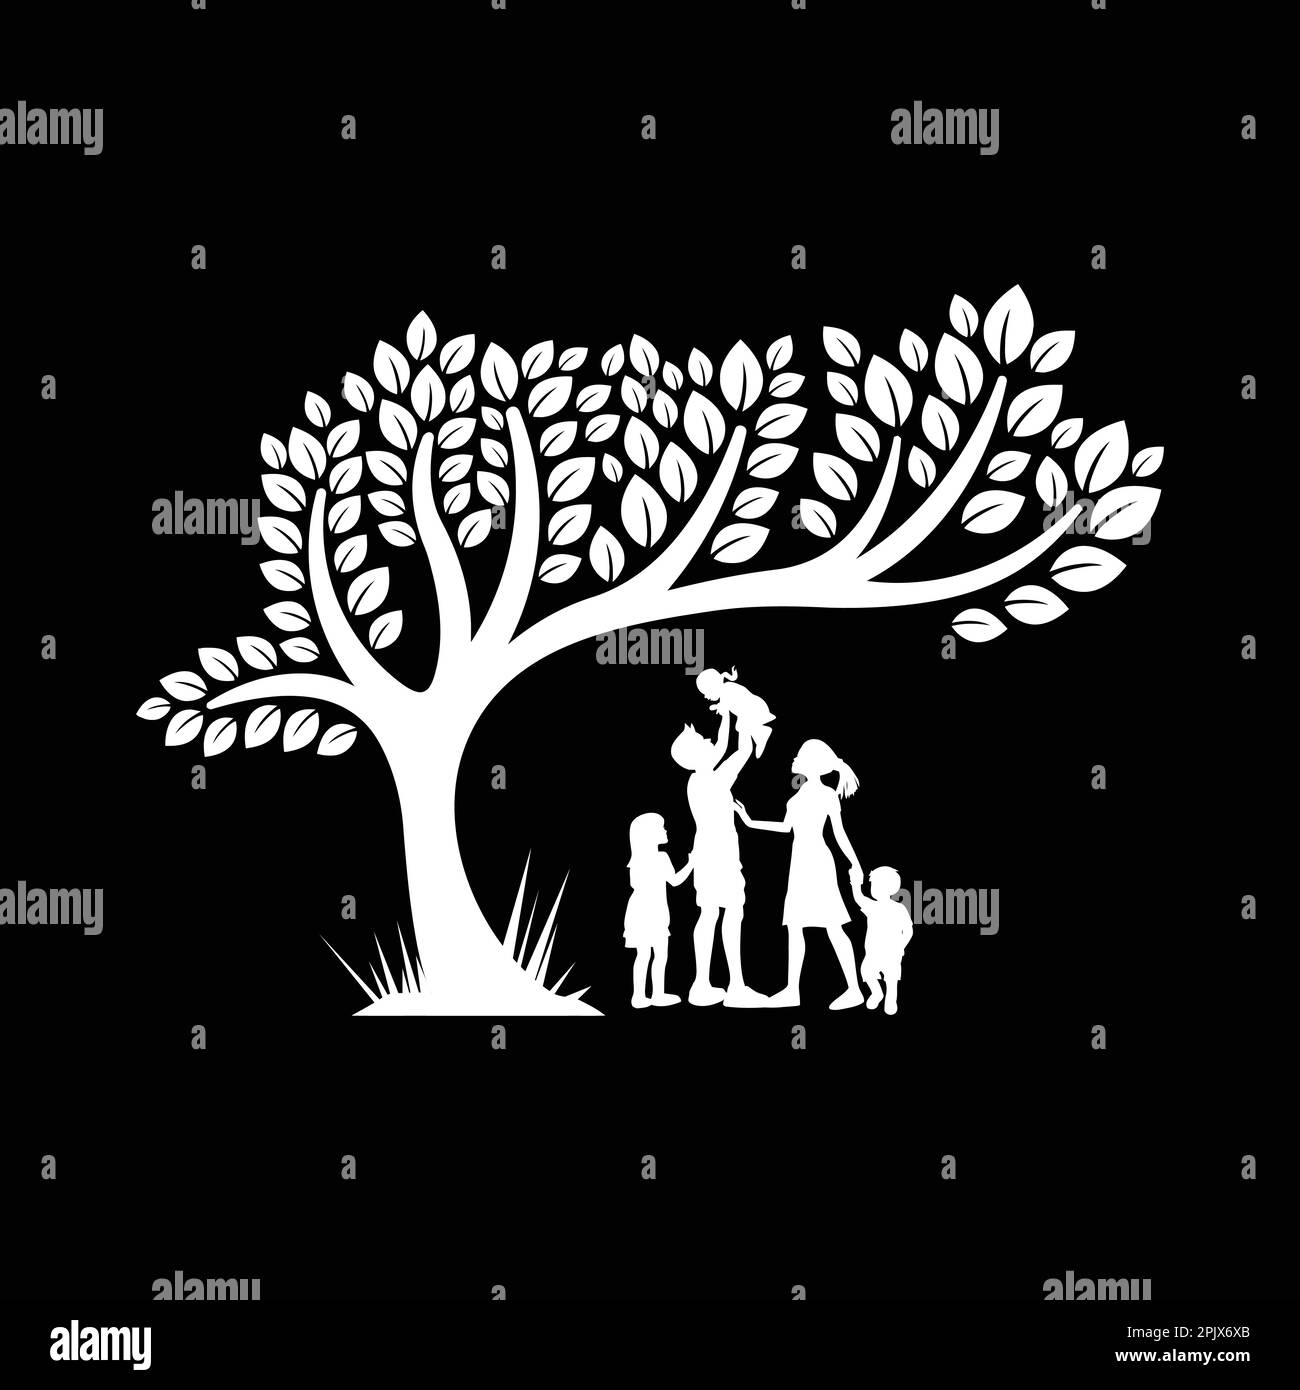 Parents with child silhouette Family in nature icon logo Stock Vector